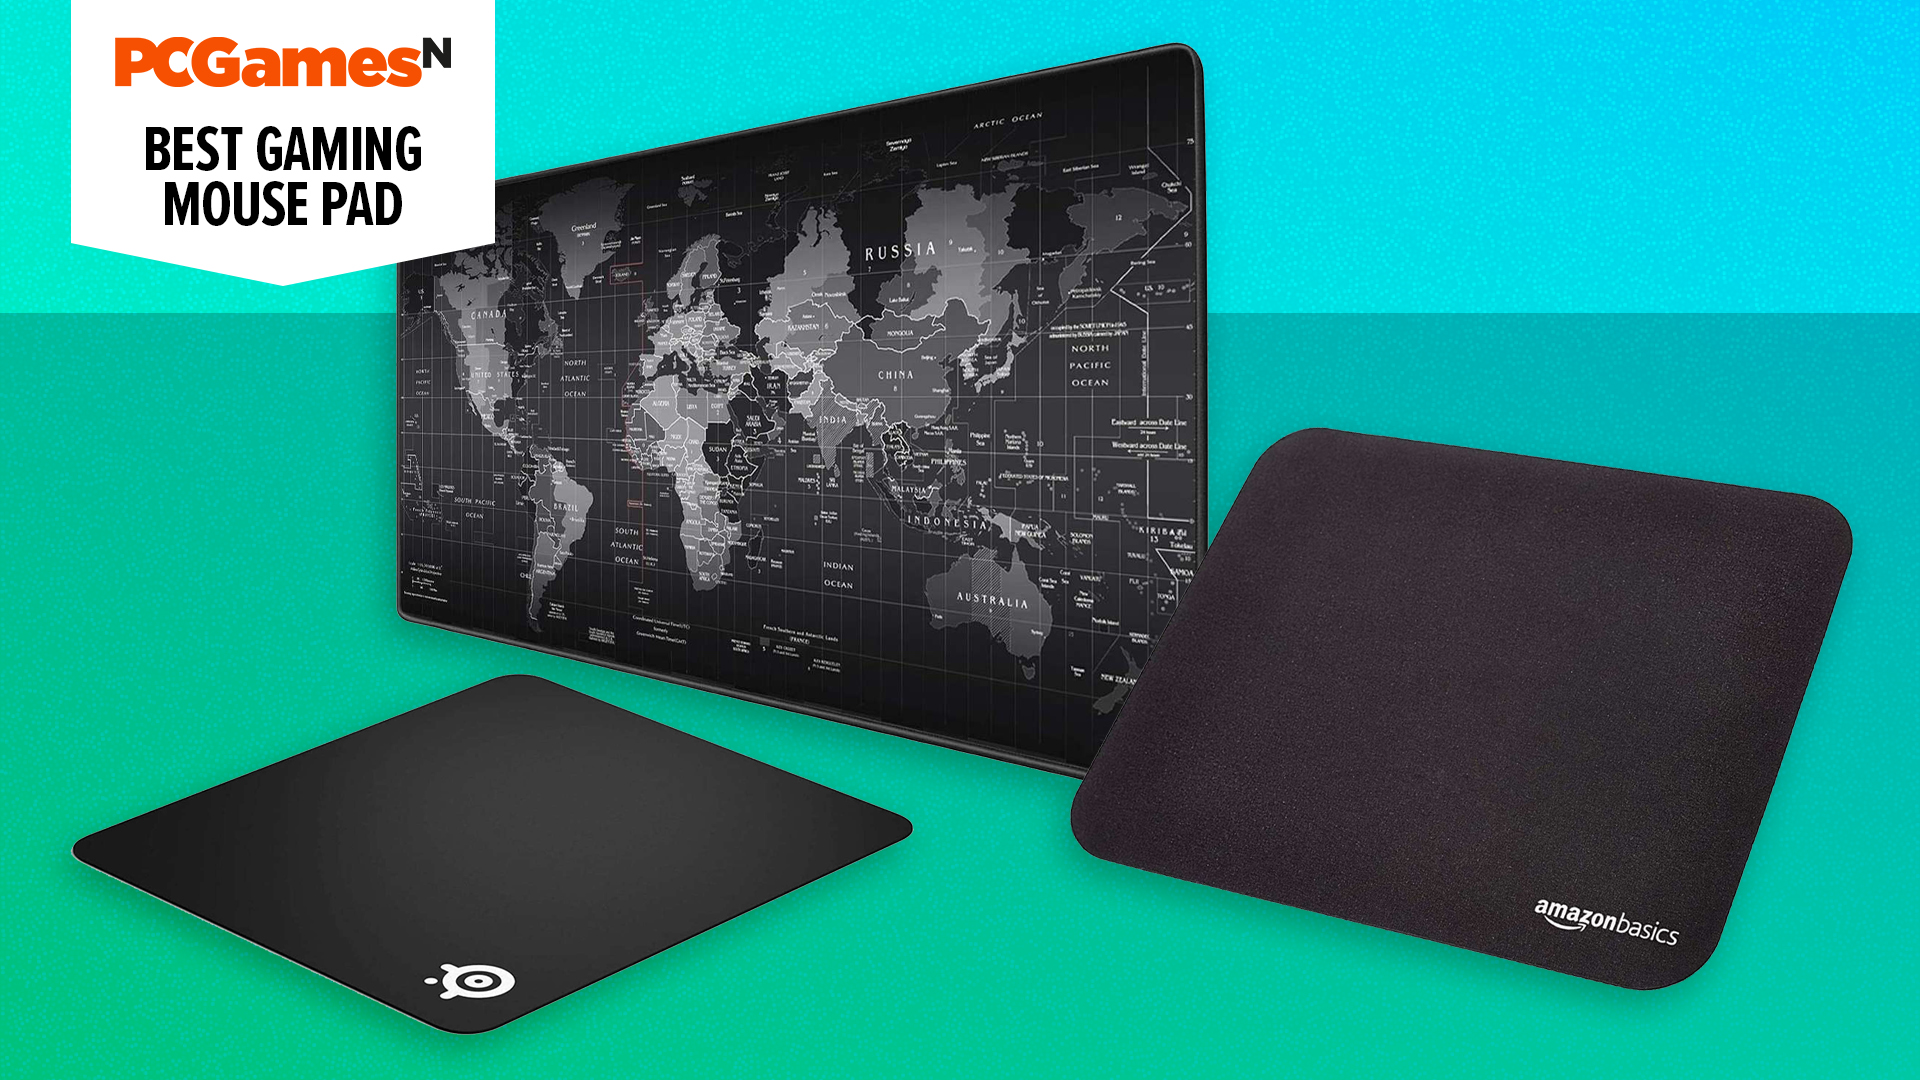 Mousepad sizes compared: What size mousepad do you need?